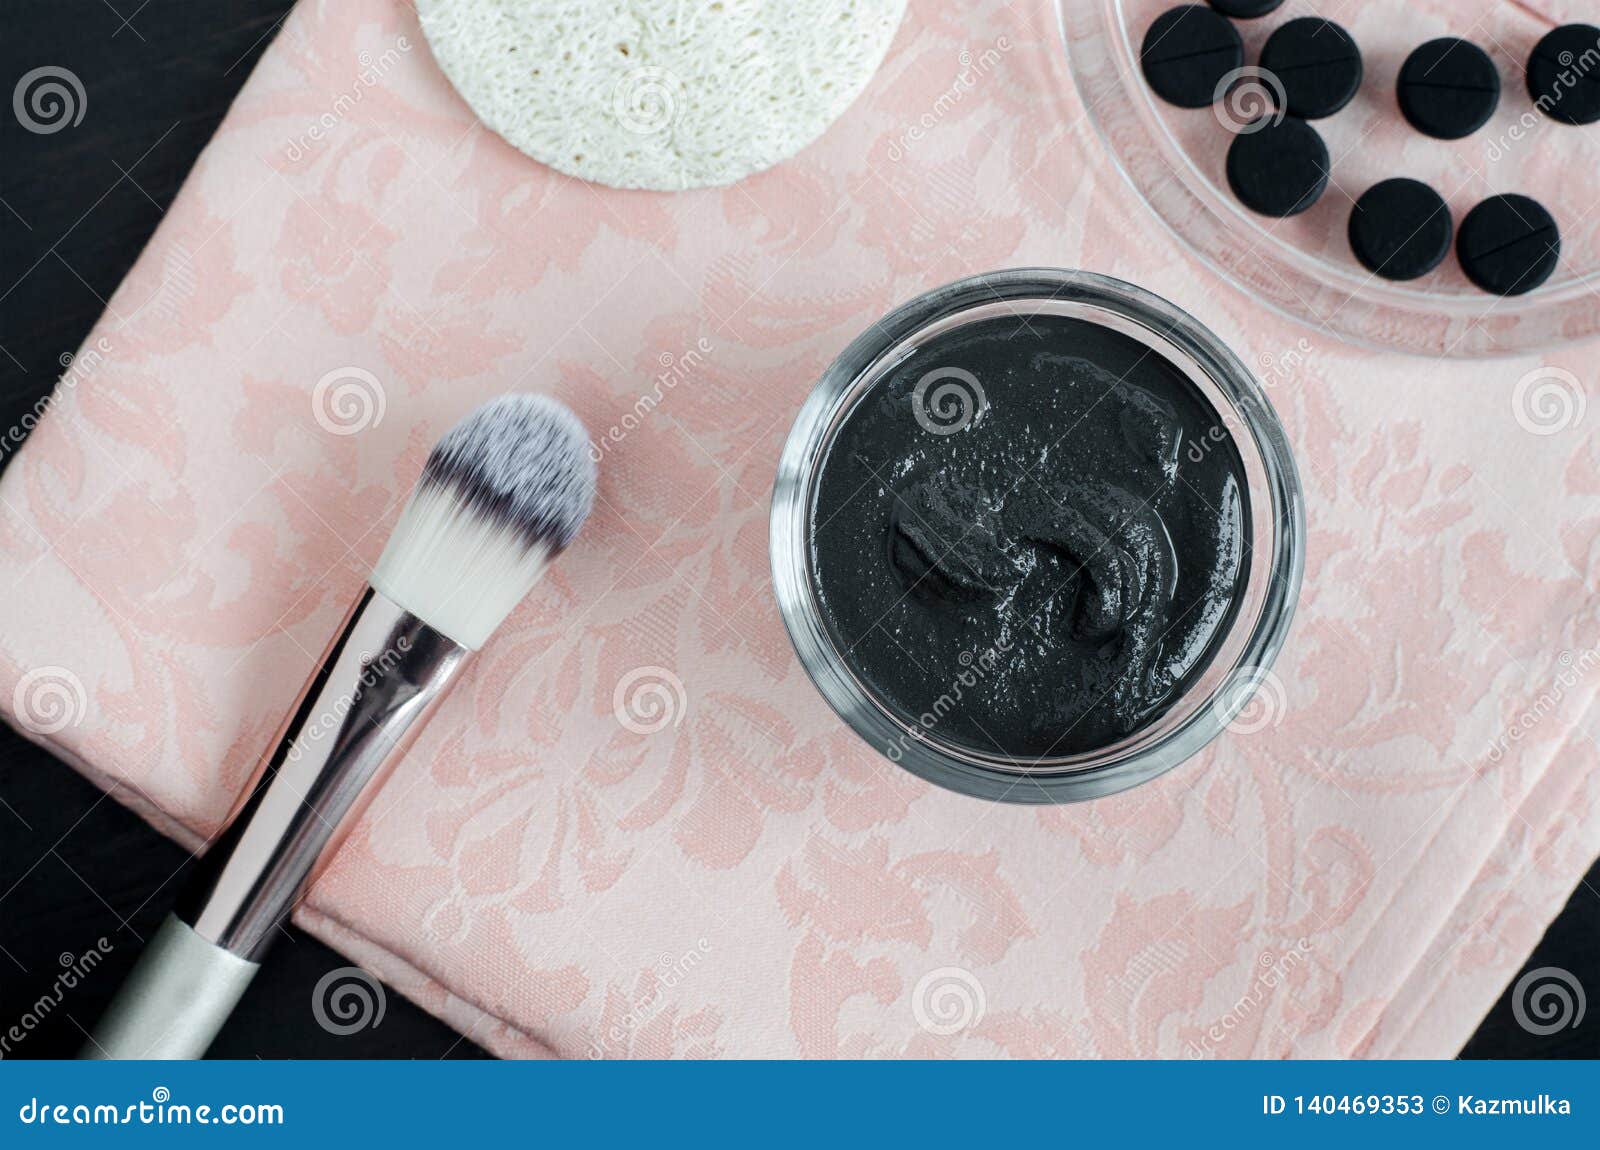 Download 510 Activated Charcoal Mask Photos Free Royalty Free Stock Photos From Dreamstime PSD Mockup Templates